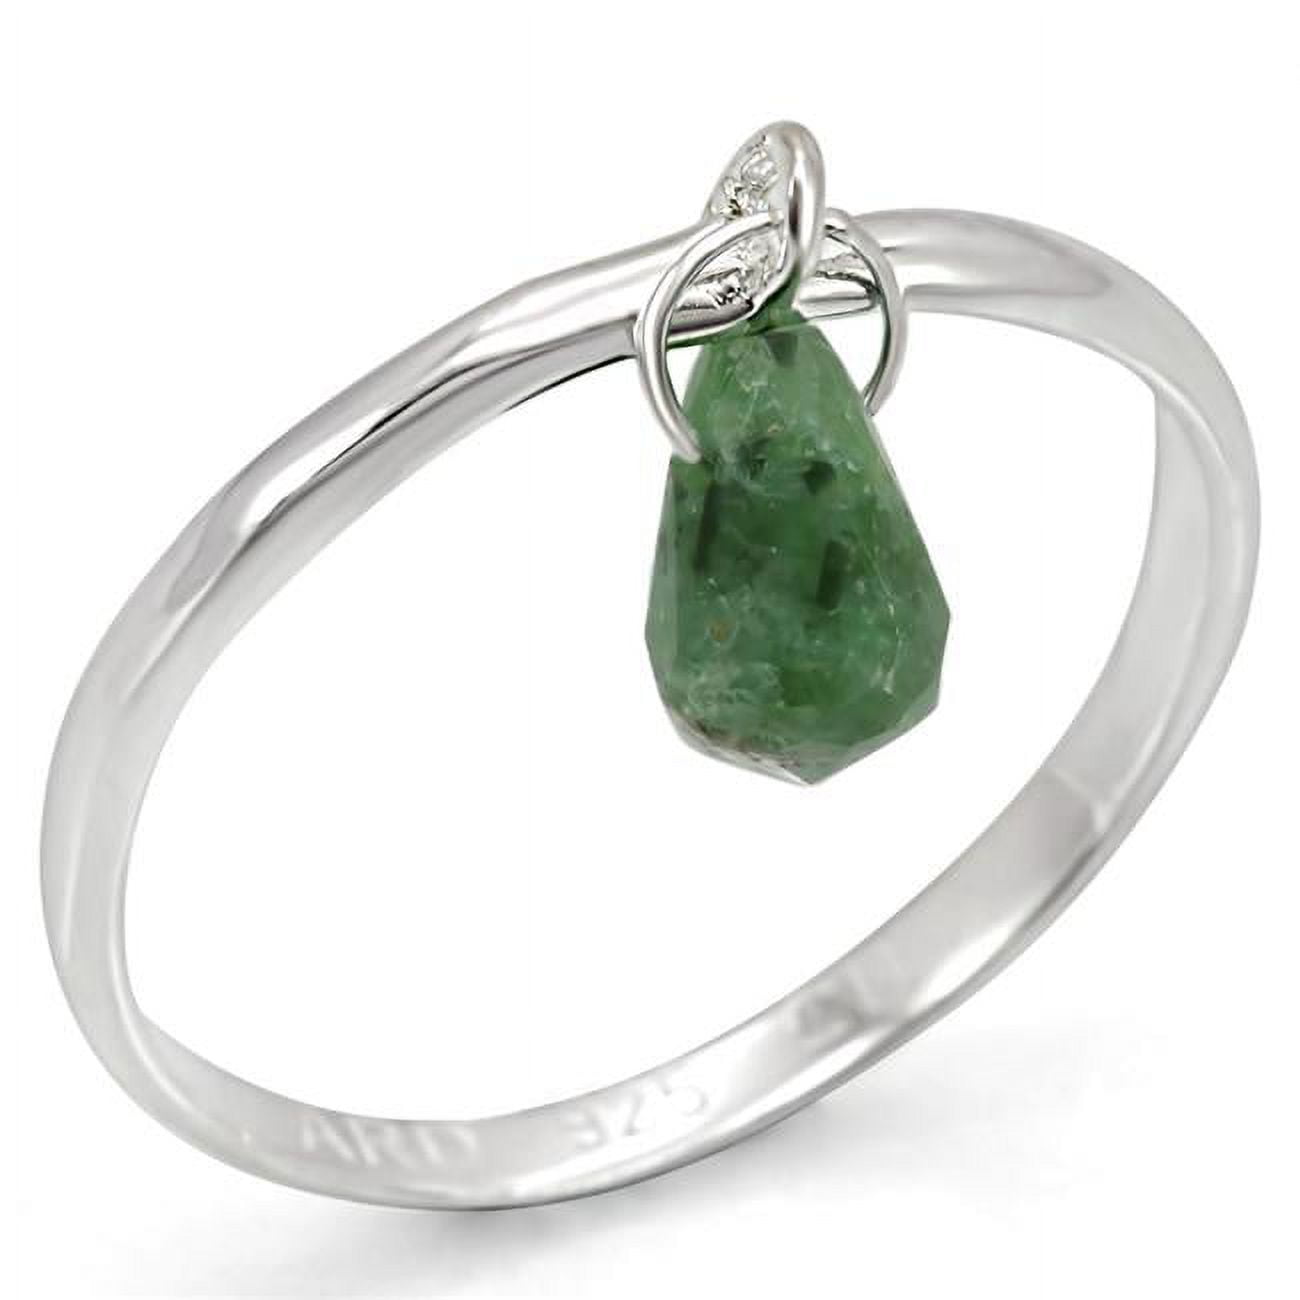 Picture of Alamode LOS322-6 Women Silver 925 Sterling Silver Ring with Genuine Stone in Emerald - Size 6